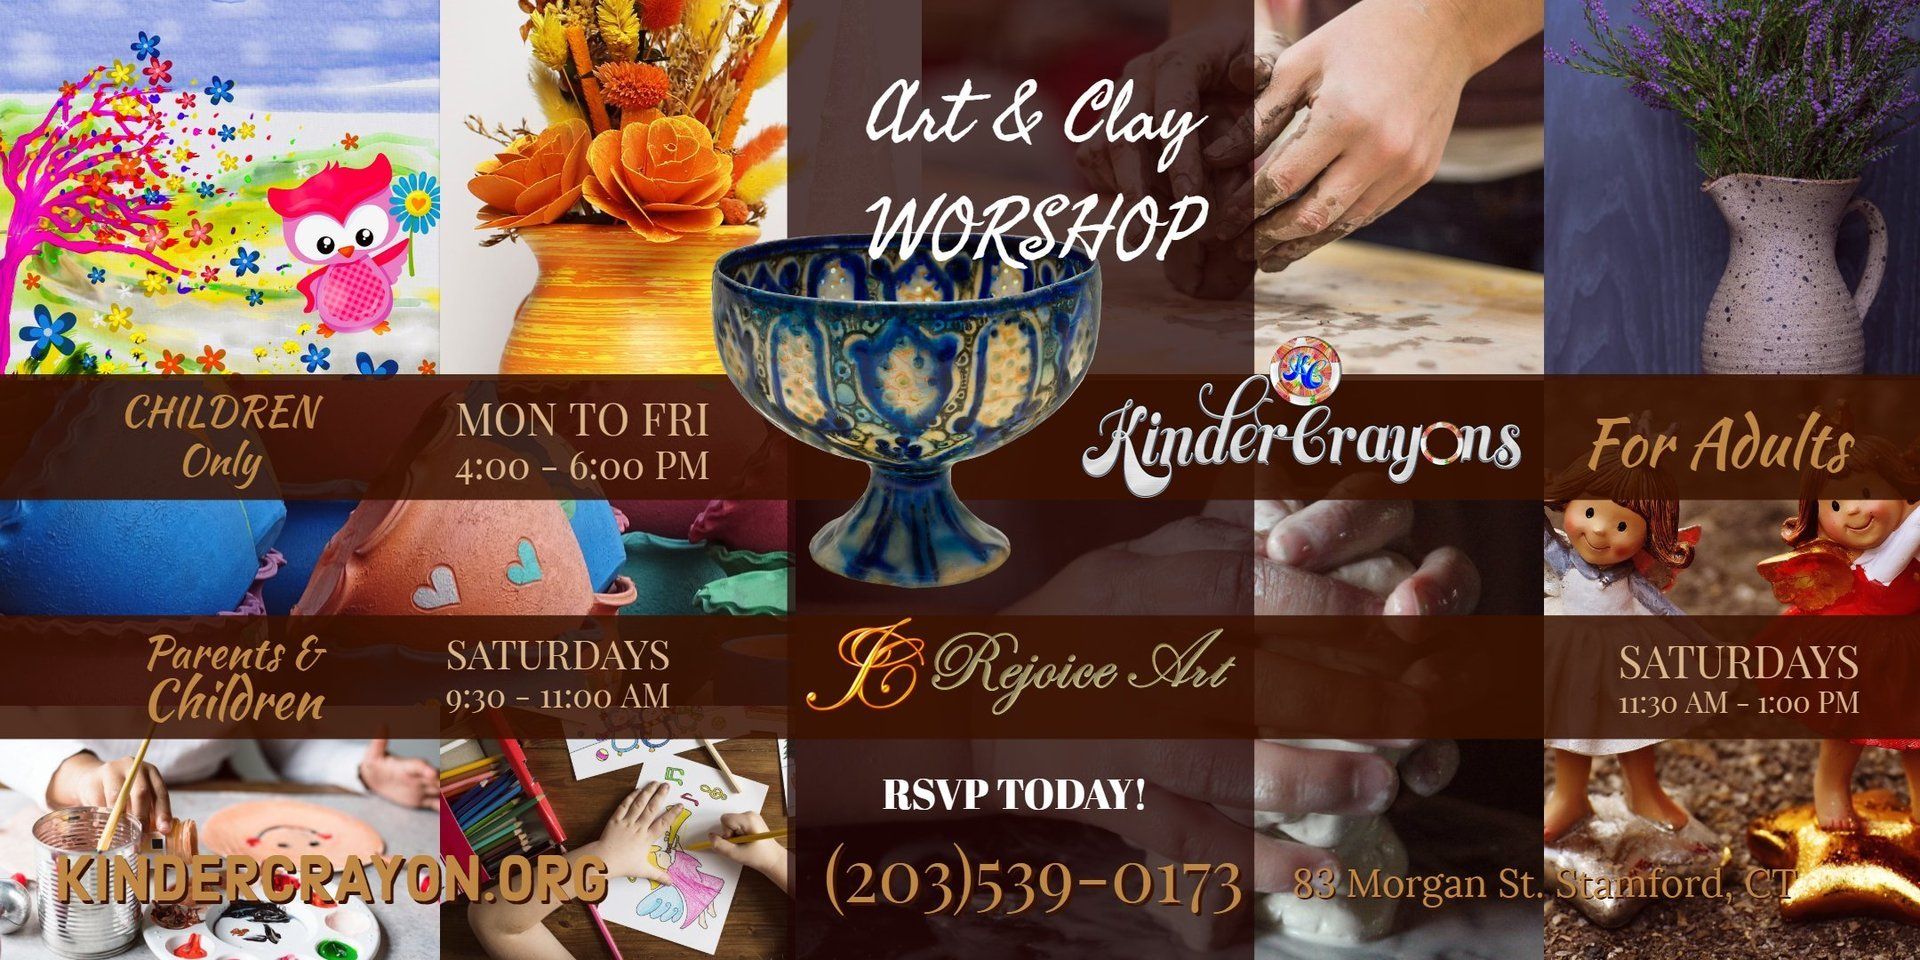 Sign Up for Art & Clay Workshop